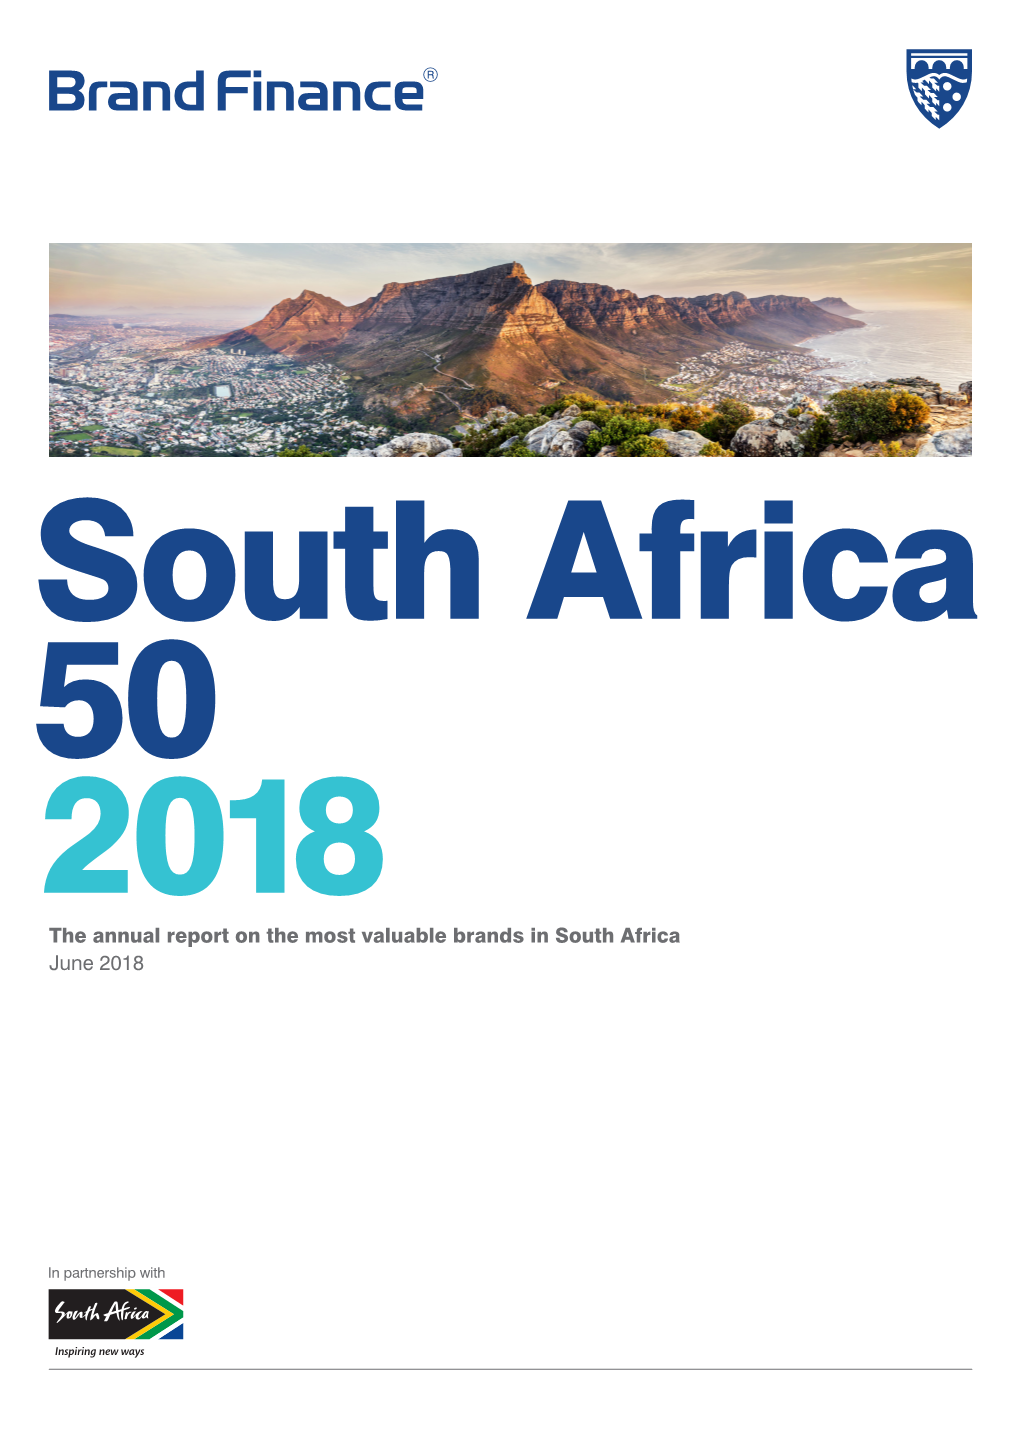 The Annual Report on the Most Valuable Brands in South Africa June 2018